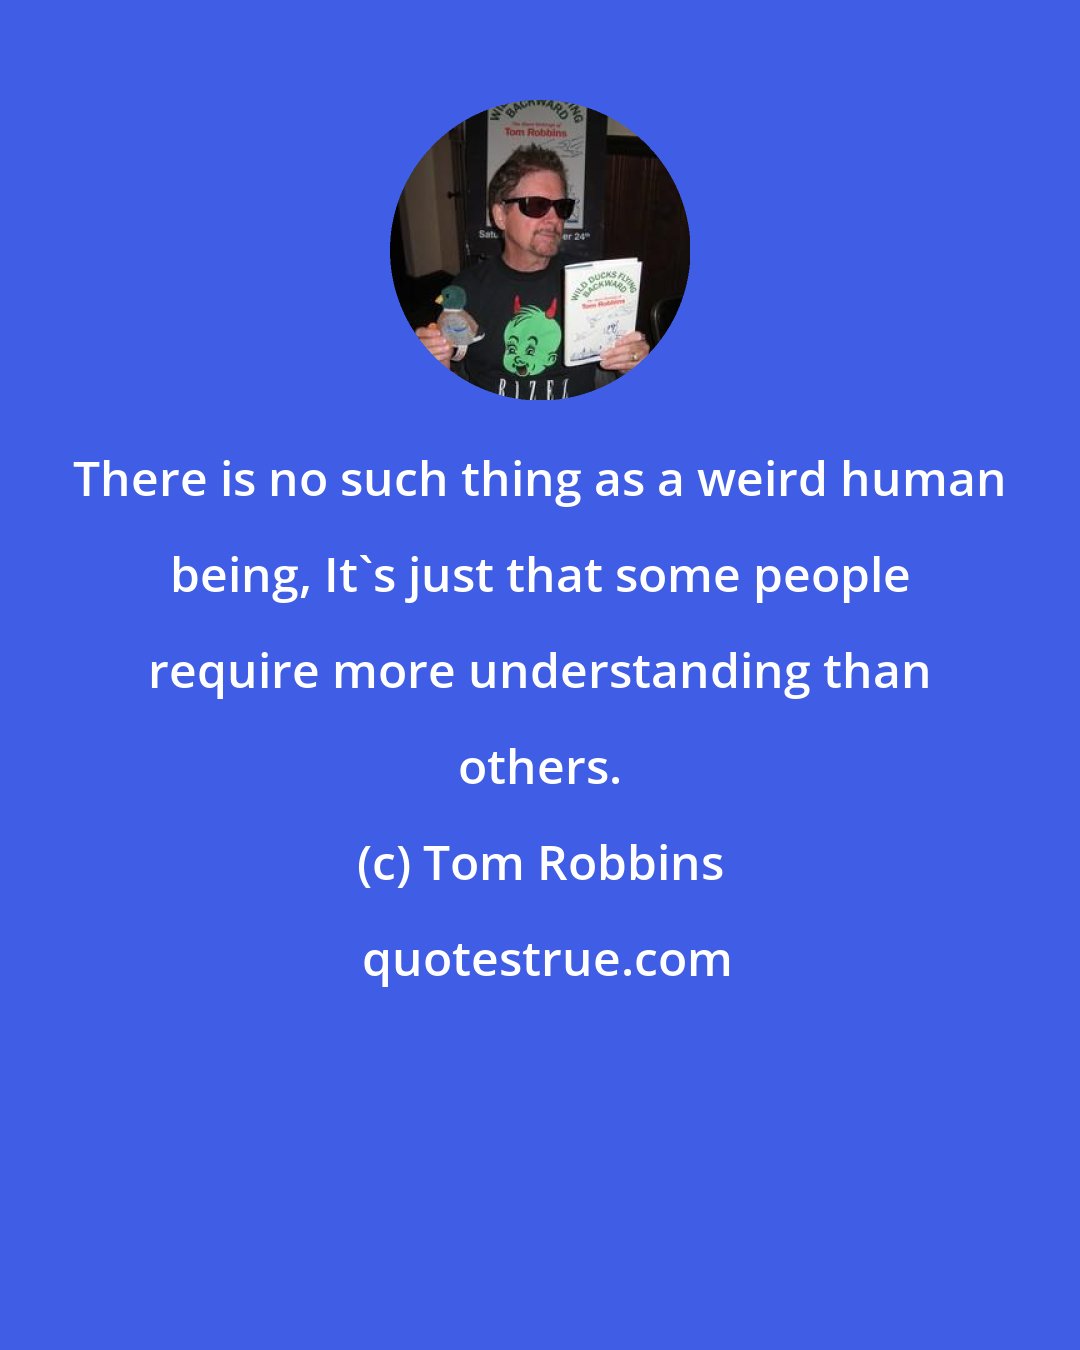 Tom Robbins: There is no such thing as a weird human being, It's just that some people require more understanding than others.